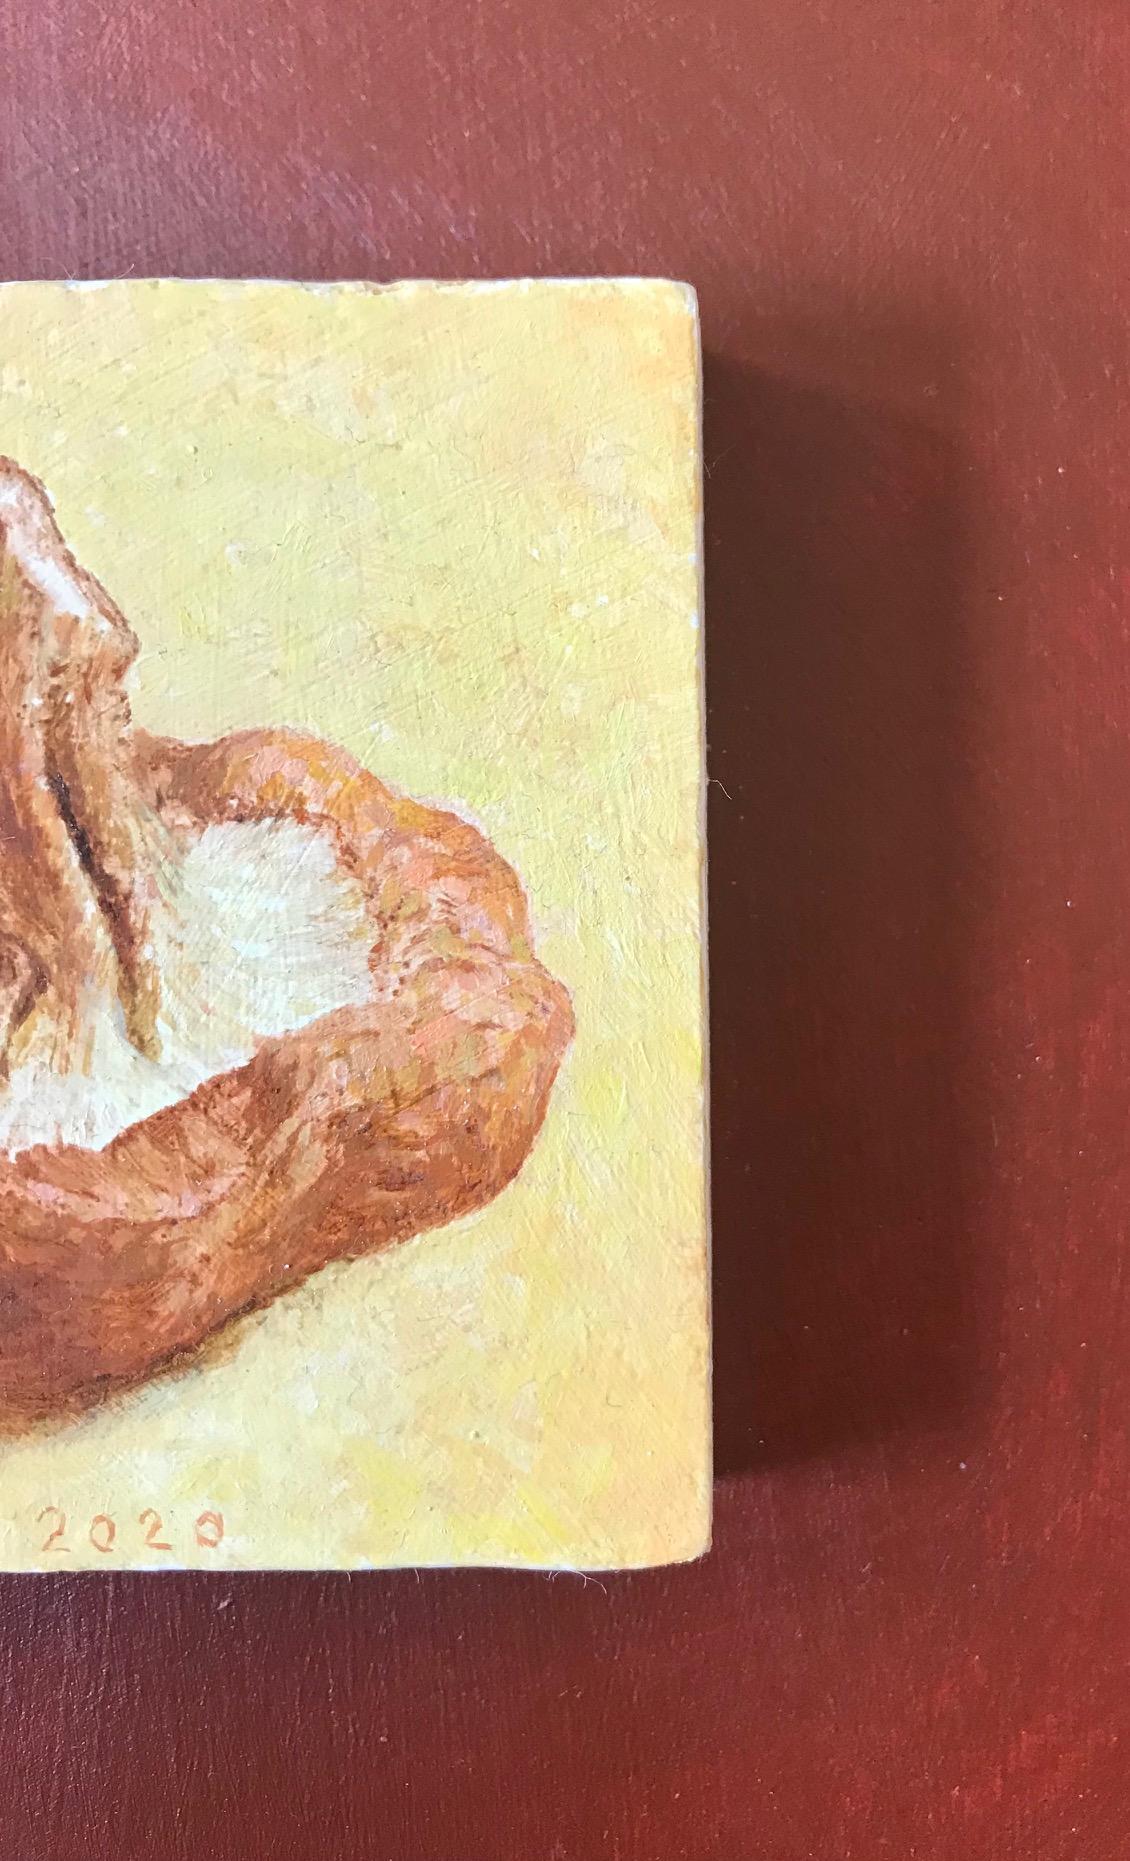 ''Shiitake'' Contemporary Dutch Miniature Still Life Painting of a Shiitake - Brown Figurative Painting by Nico Heilijgers